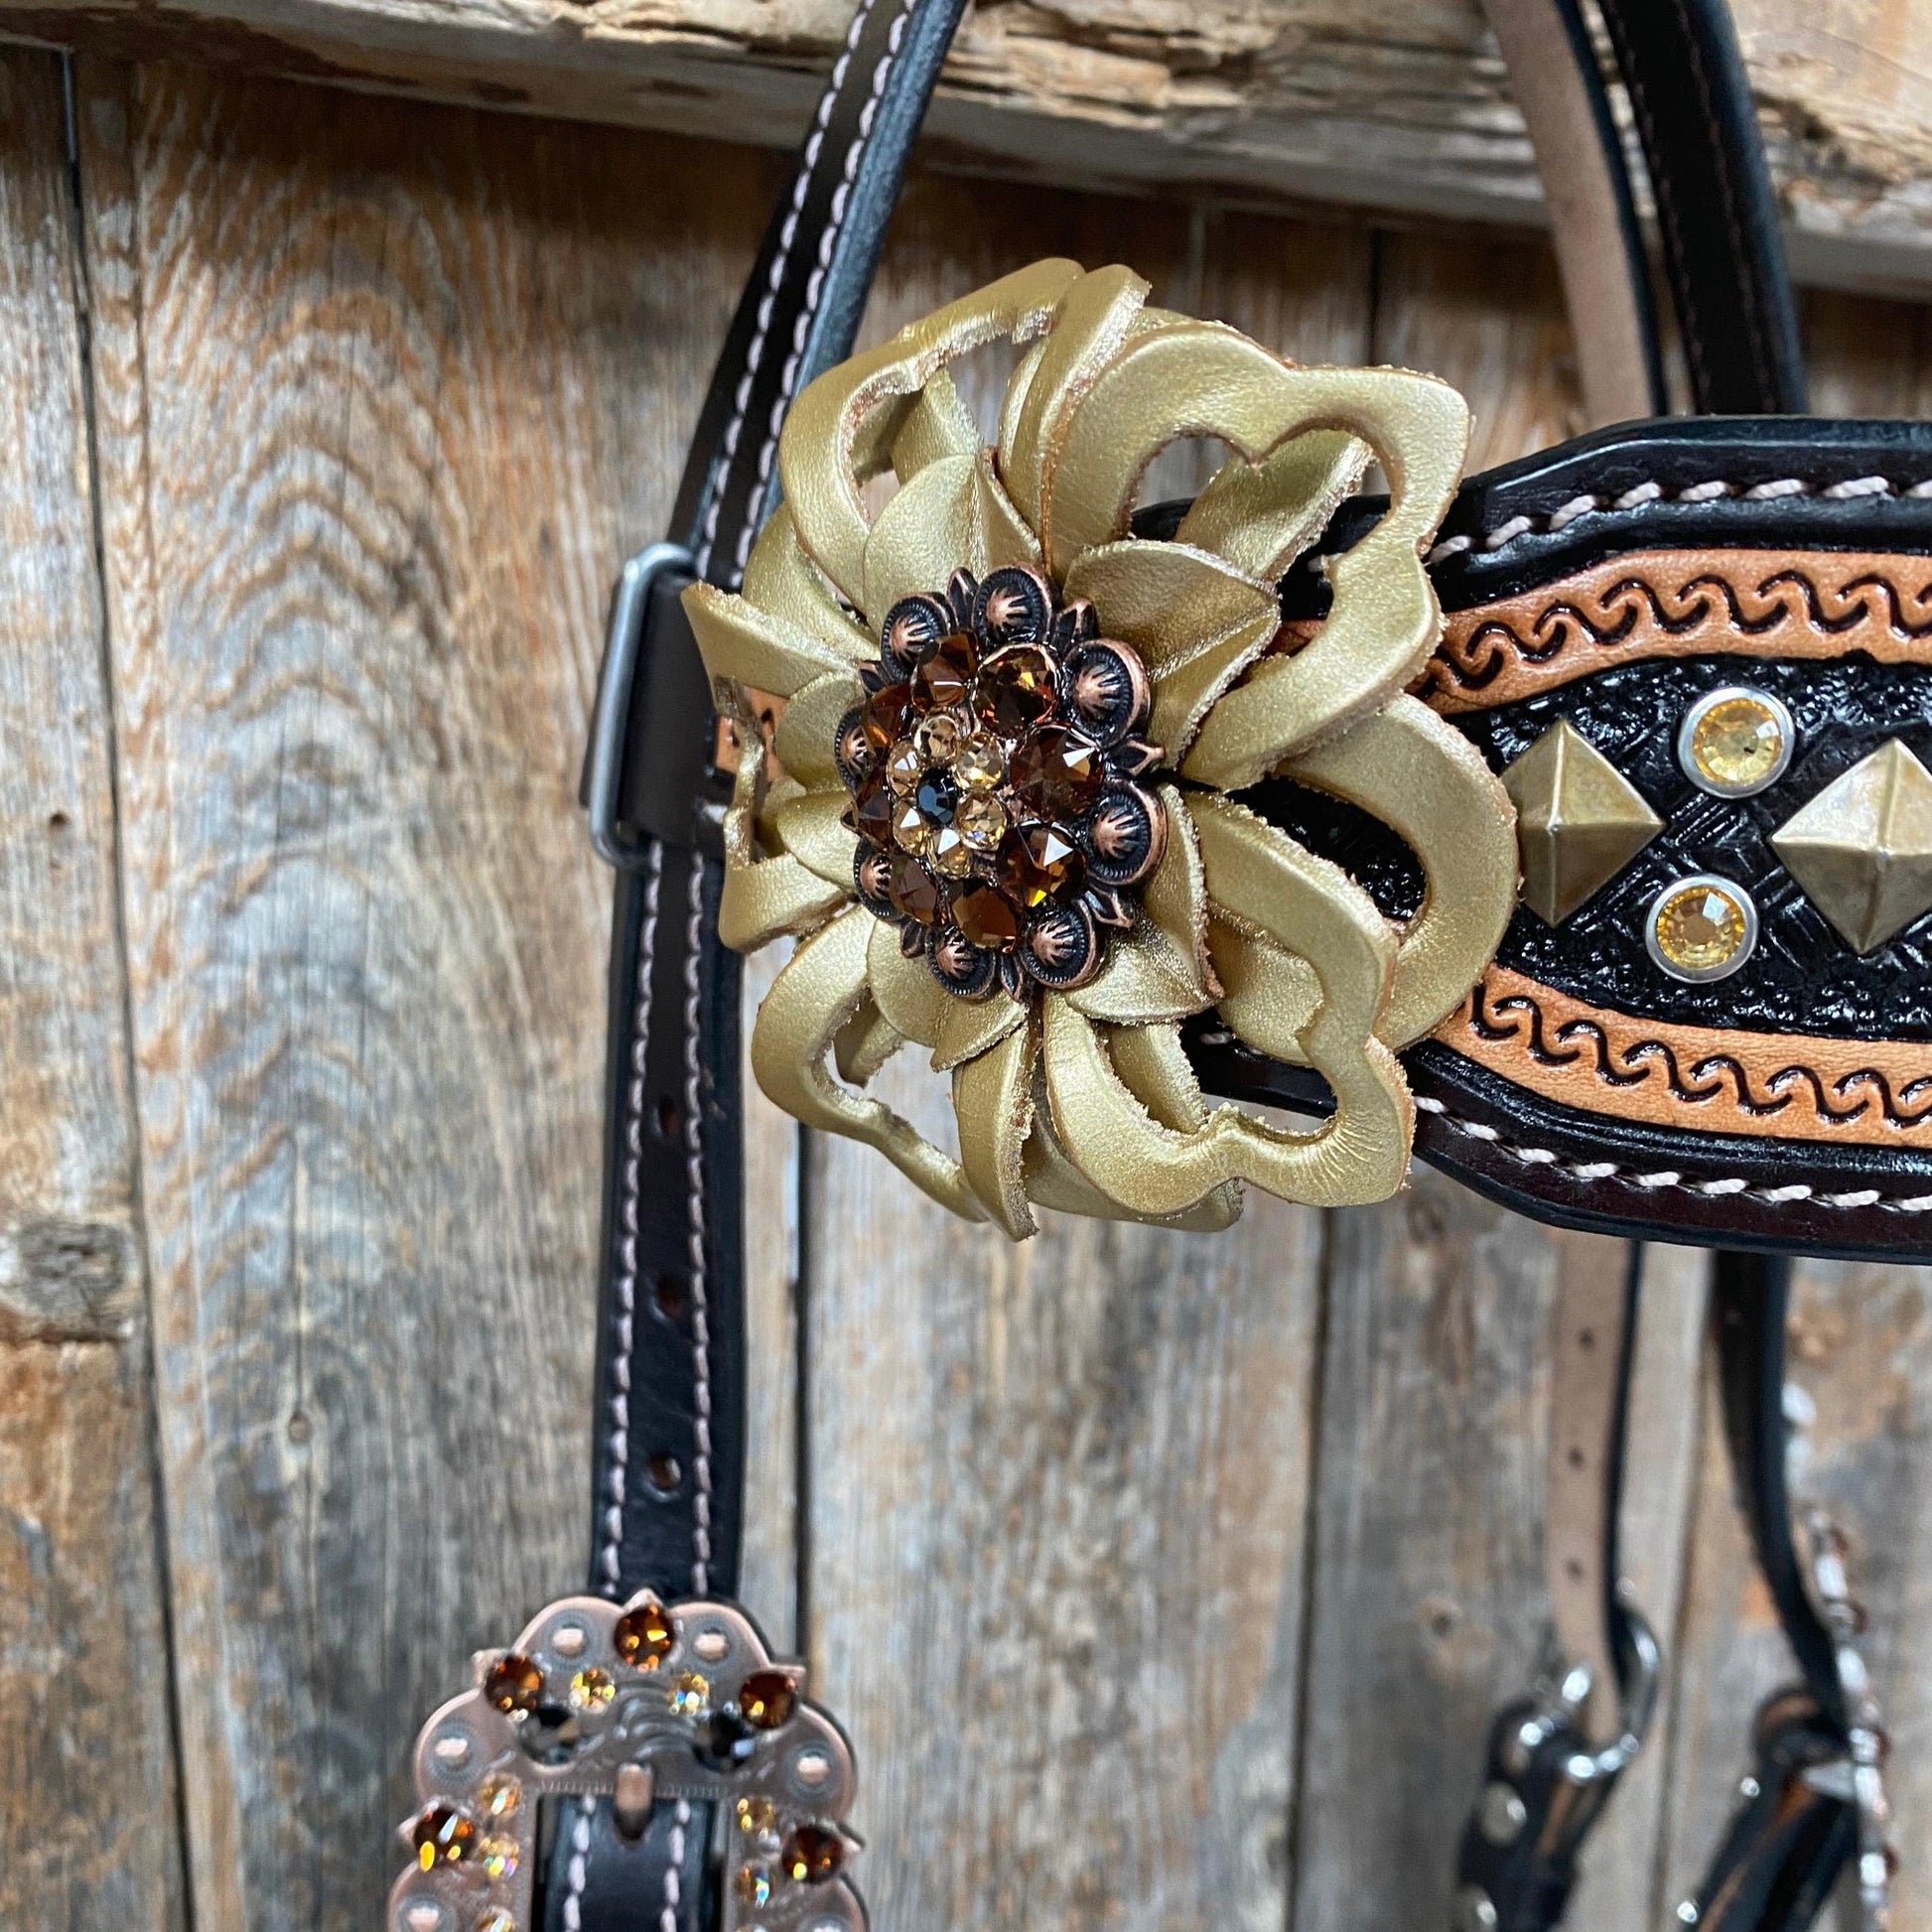 Two Tone Leather - Brass Studded Gold Browband / Breastcollar #BBBC538 - RODEO DRIVE